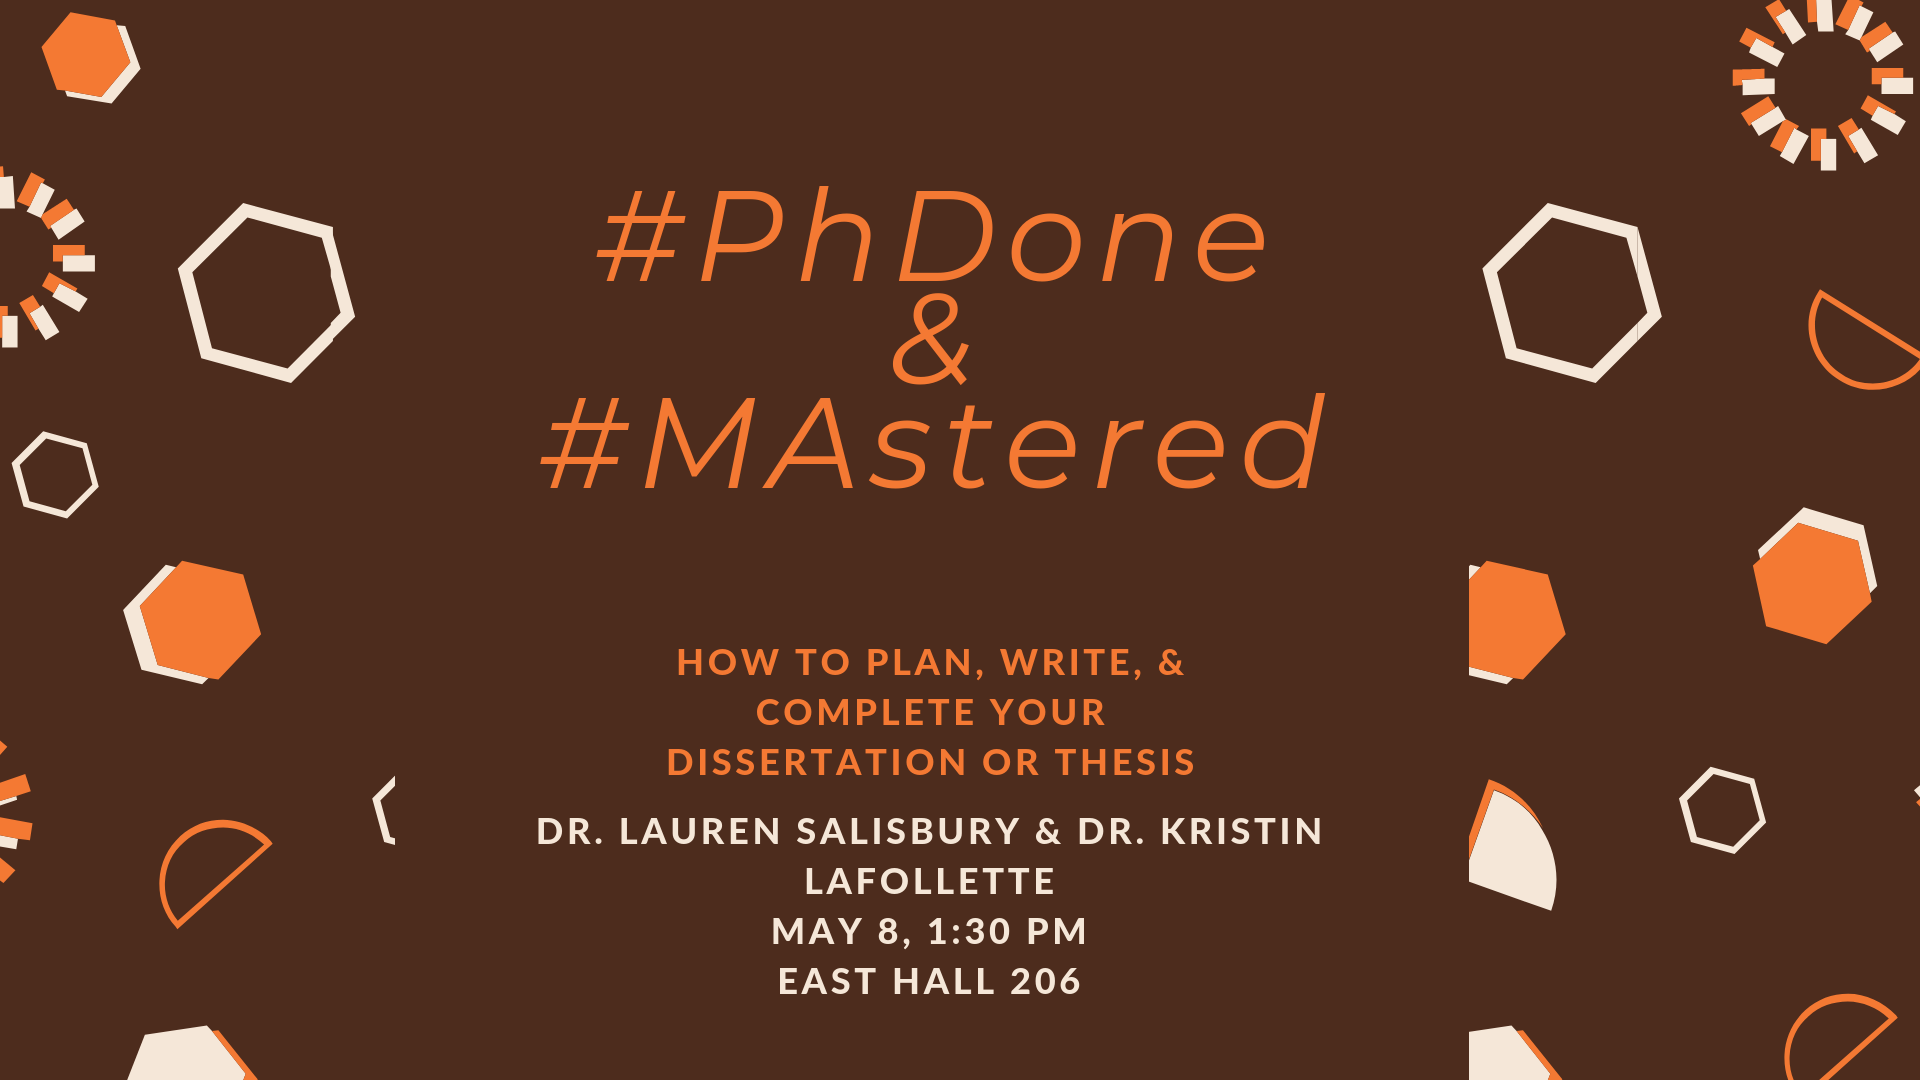 #PhDone and #MAstered appear on a brown background with multicolored shapes; event information is included below